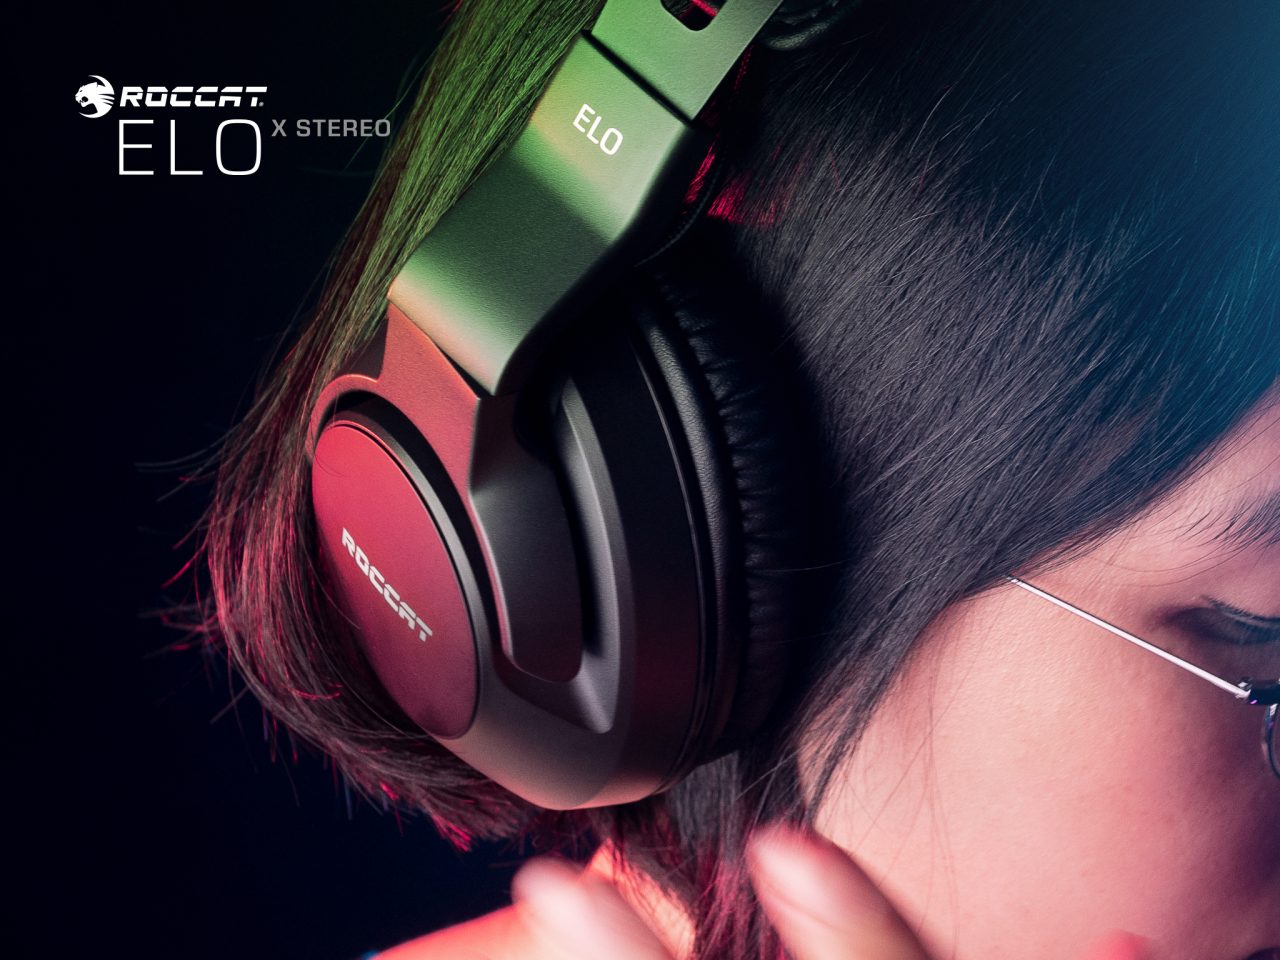 Elo X Stereo PC Gaming Headset (Turtle Beach/ROCCAT)